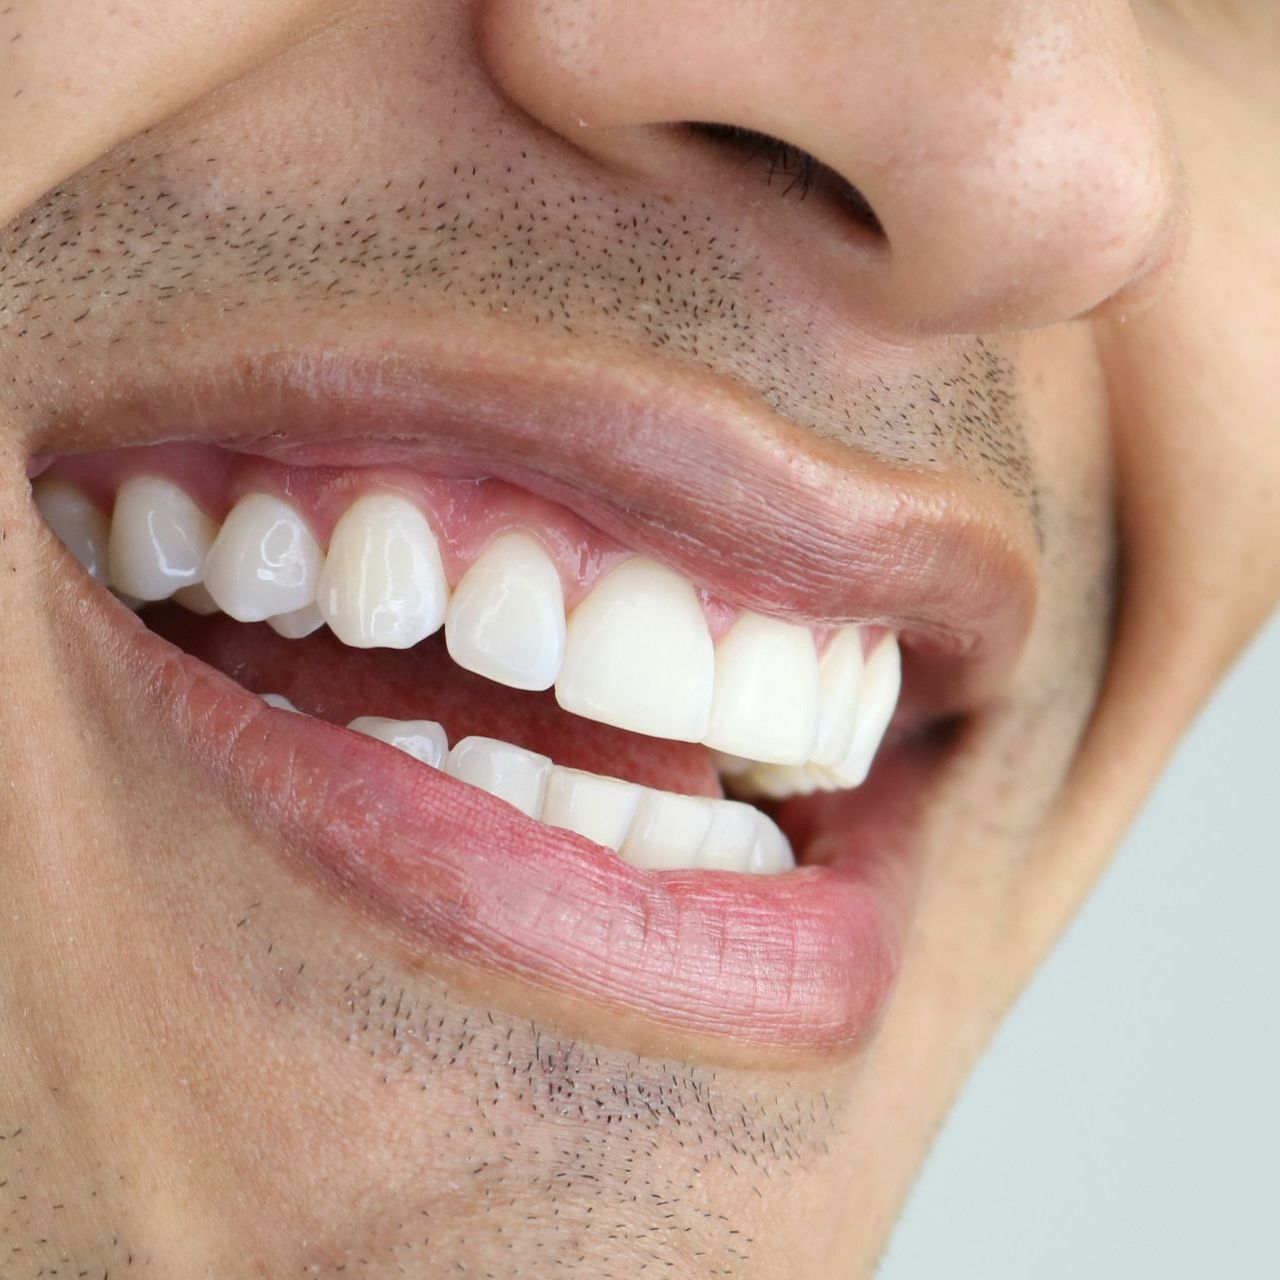 An up close shot of a man's smile with straight, white teeth